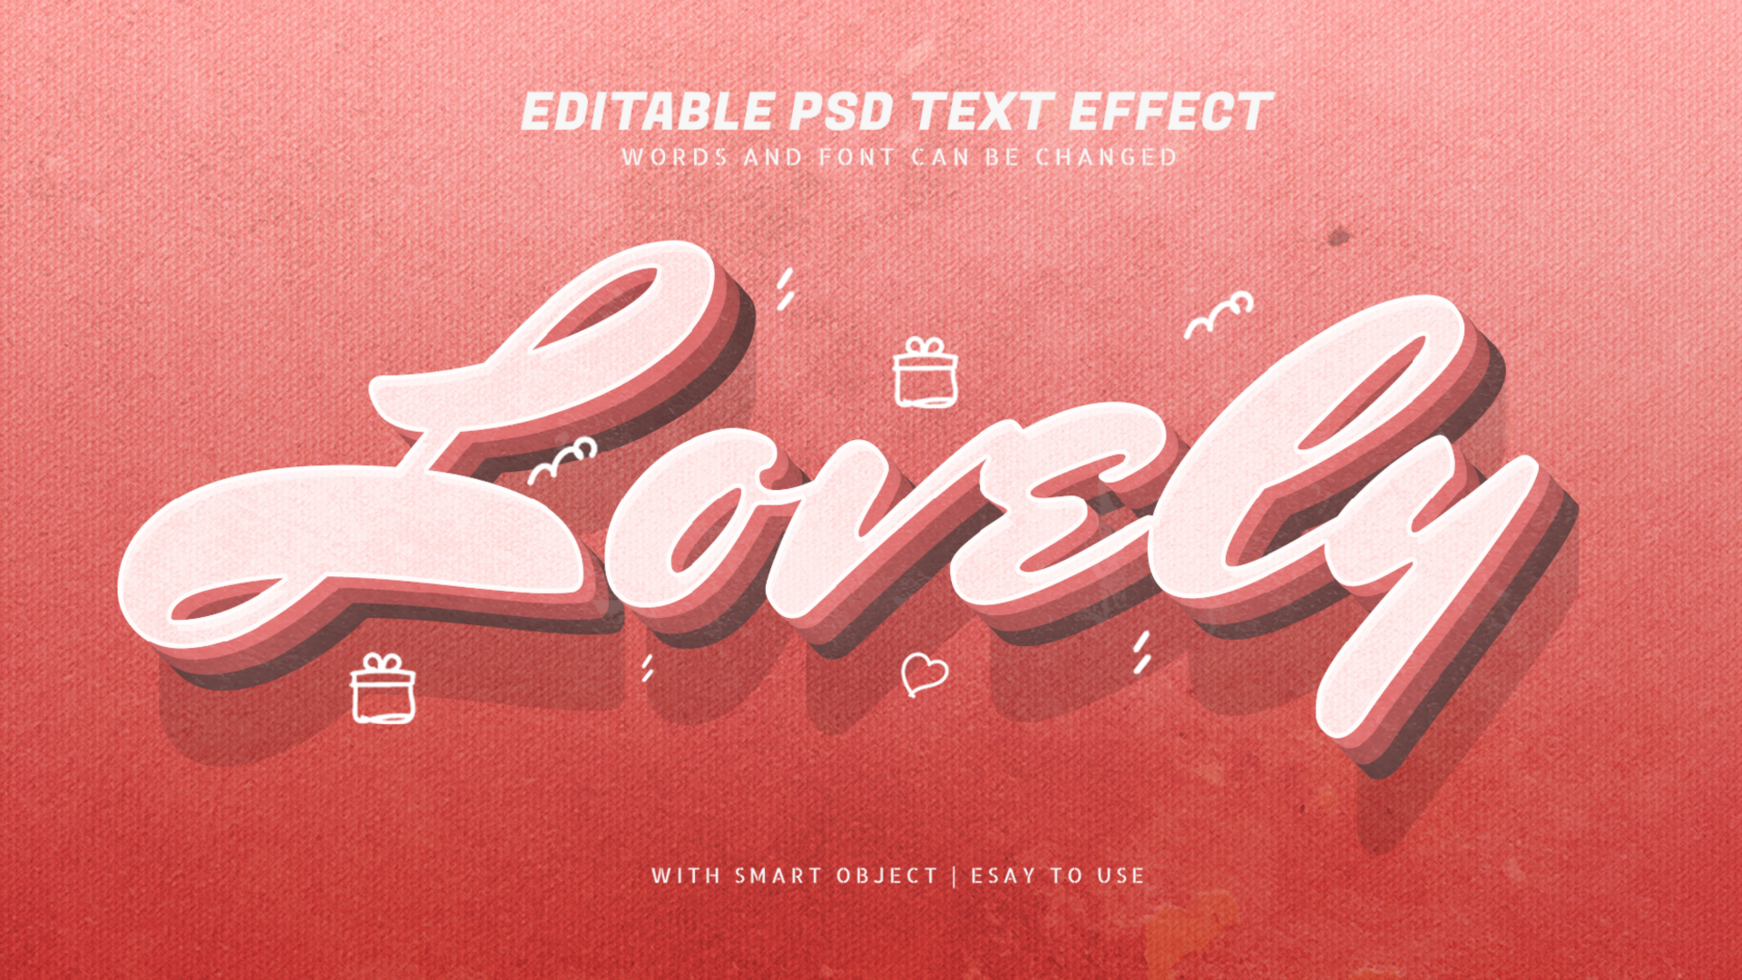 Lovely 3d retro vintage style text effect psd